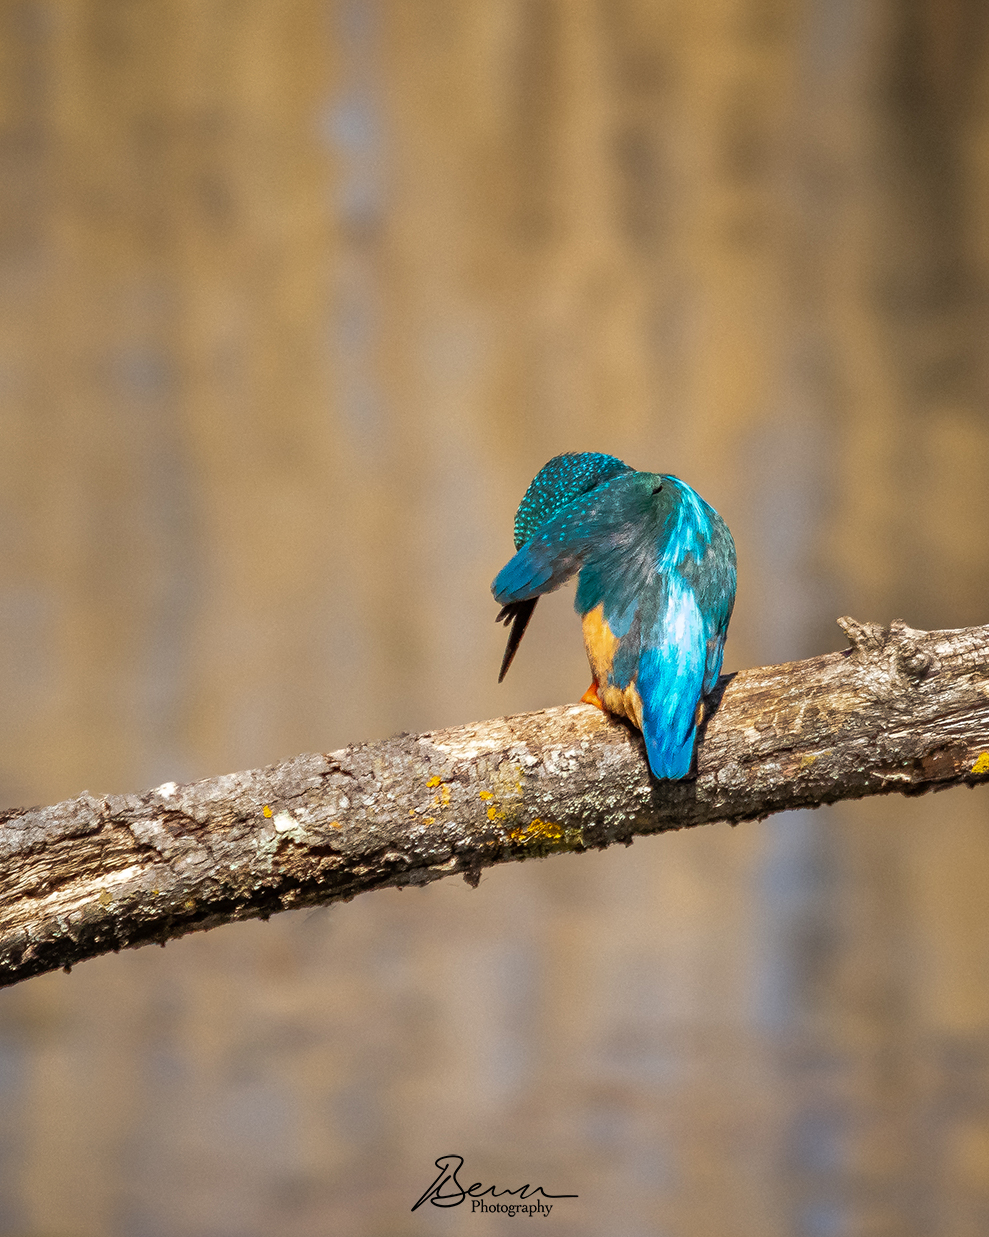 “Shy Kingfisher”. A kingfisher that clearly isn’t too fond of its picture being taken!